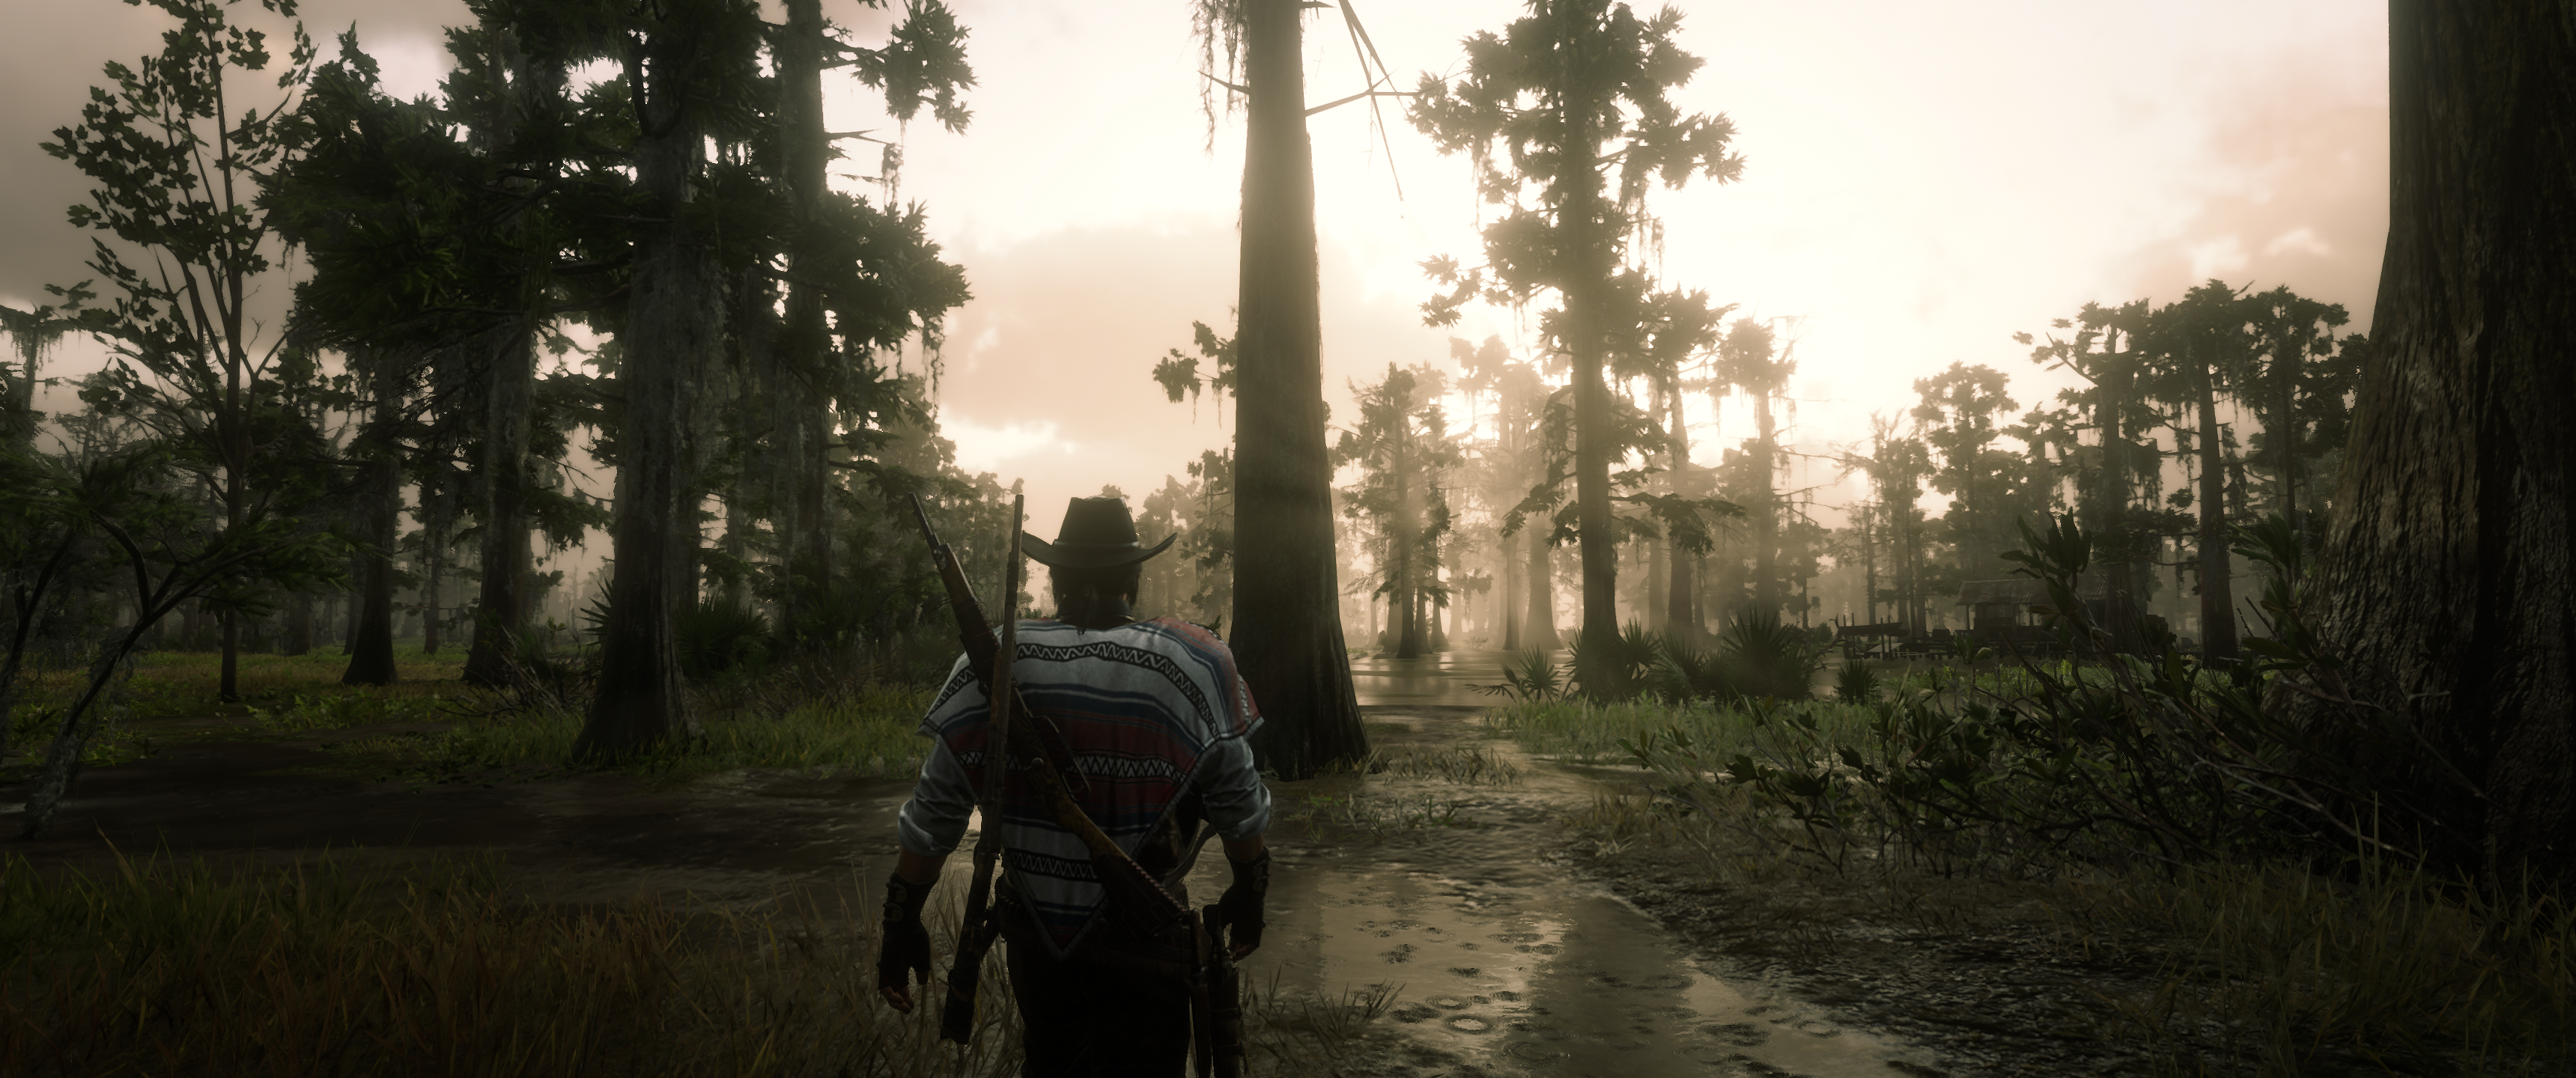 General 3440x1440 PC gaming Red Dead Redemption 2 screen shot video game landscape trees